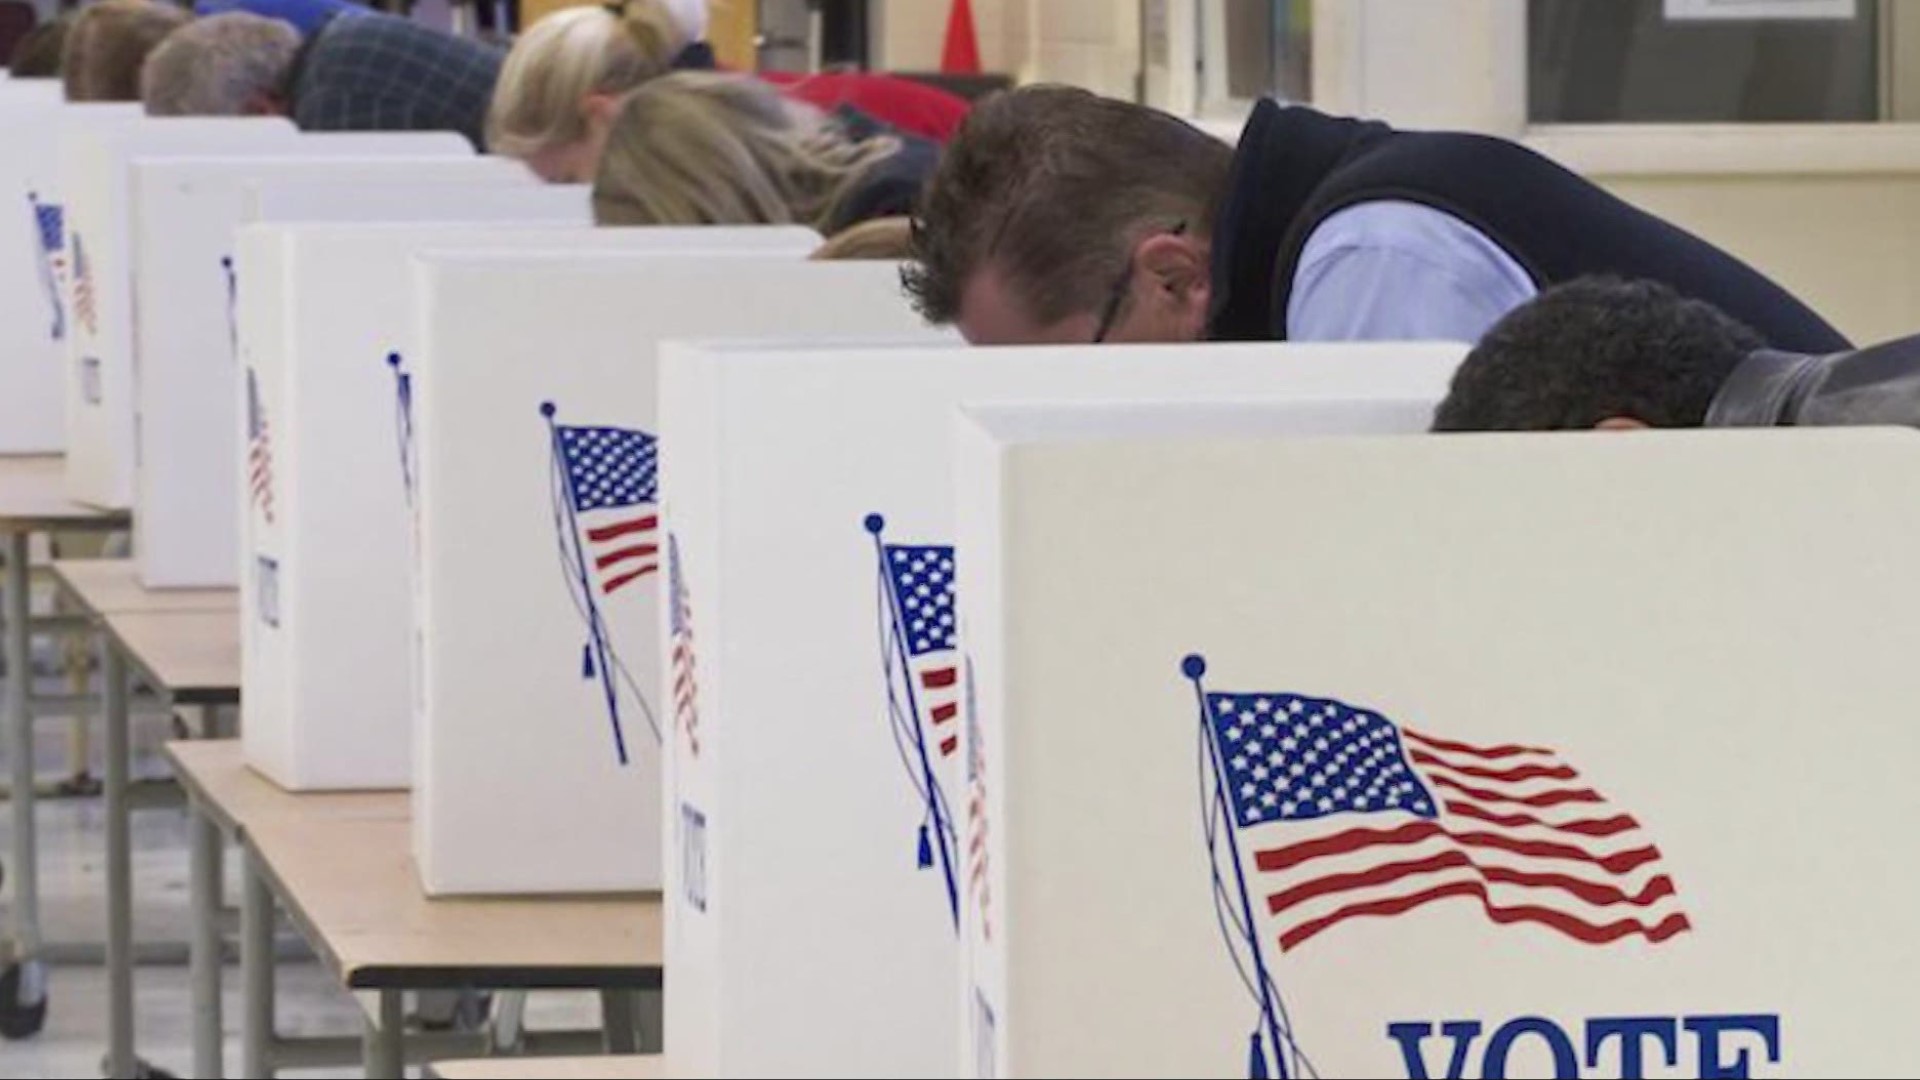 Heading to the polls for the first time? Here's what you can expect.